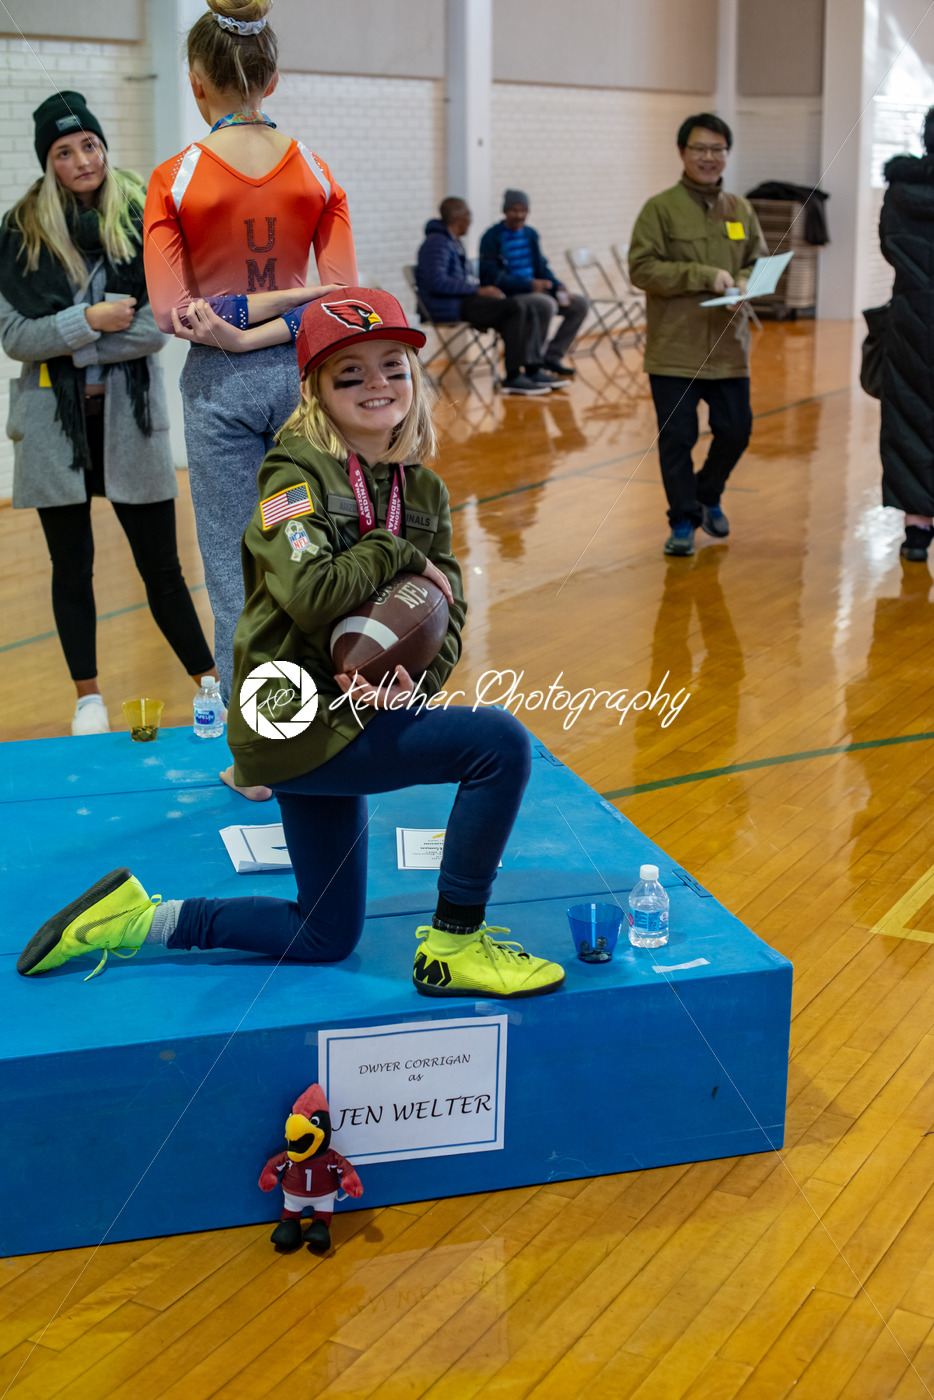 ROSEMONT, PA – JANUARY 11, 2019: Fourth Grade Women in Wax at The Agnes Irwin School - Kelleher Photography Store